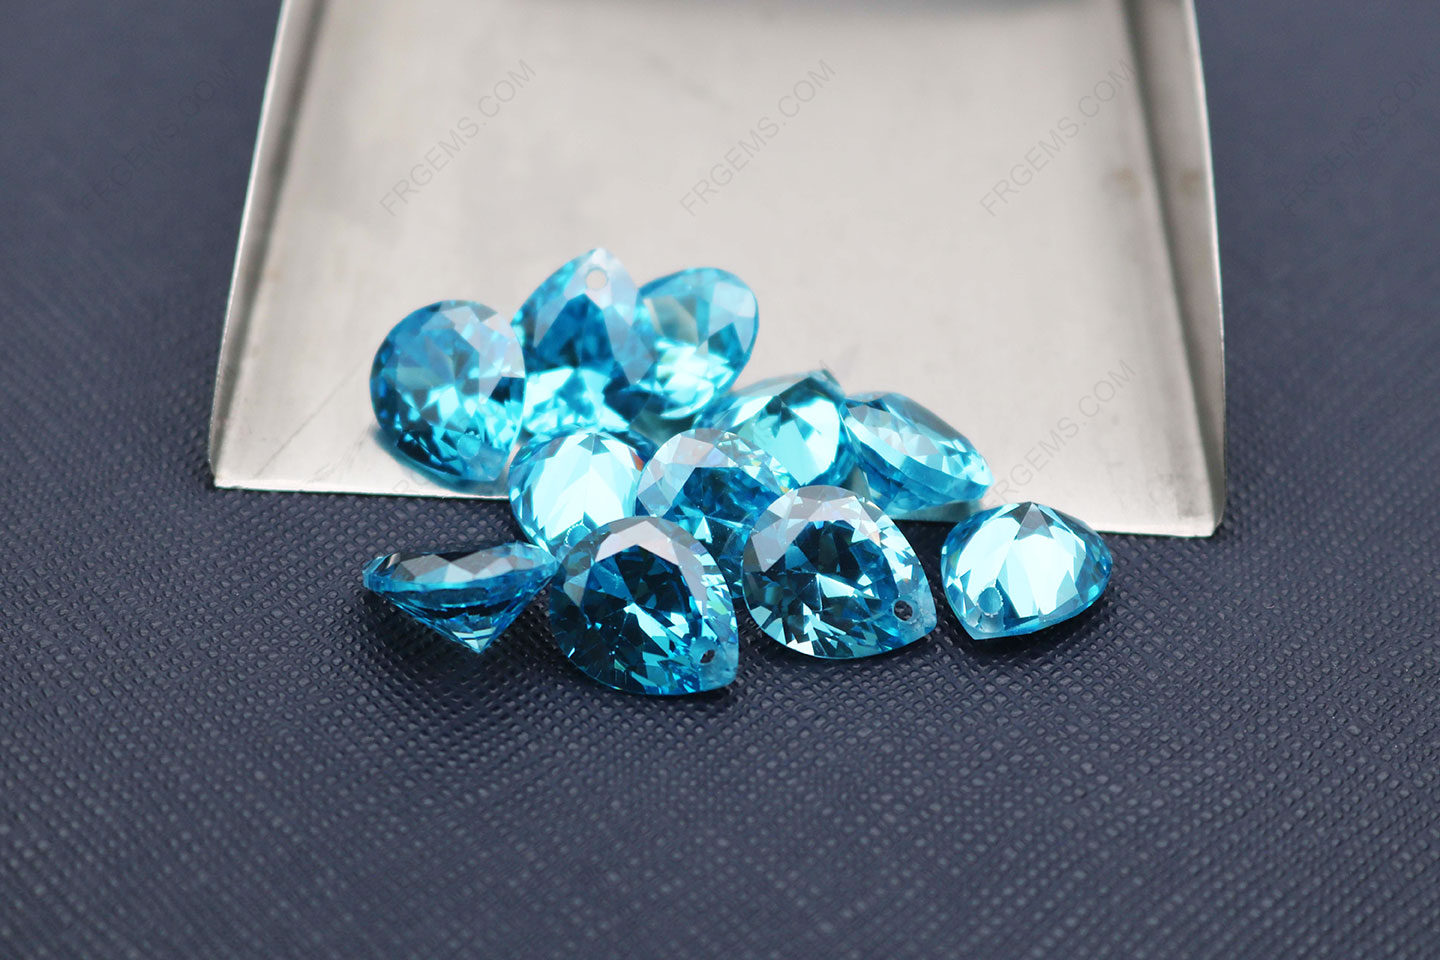 Wholesale loose Cubic Zirconia Aquamarine Blue Color Pear drop Shape Faceted Cut with Drilled hole 10x12mm gemstones